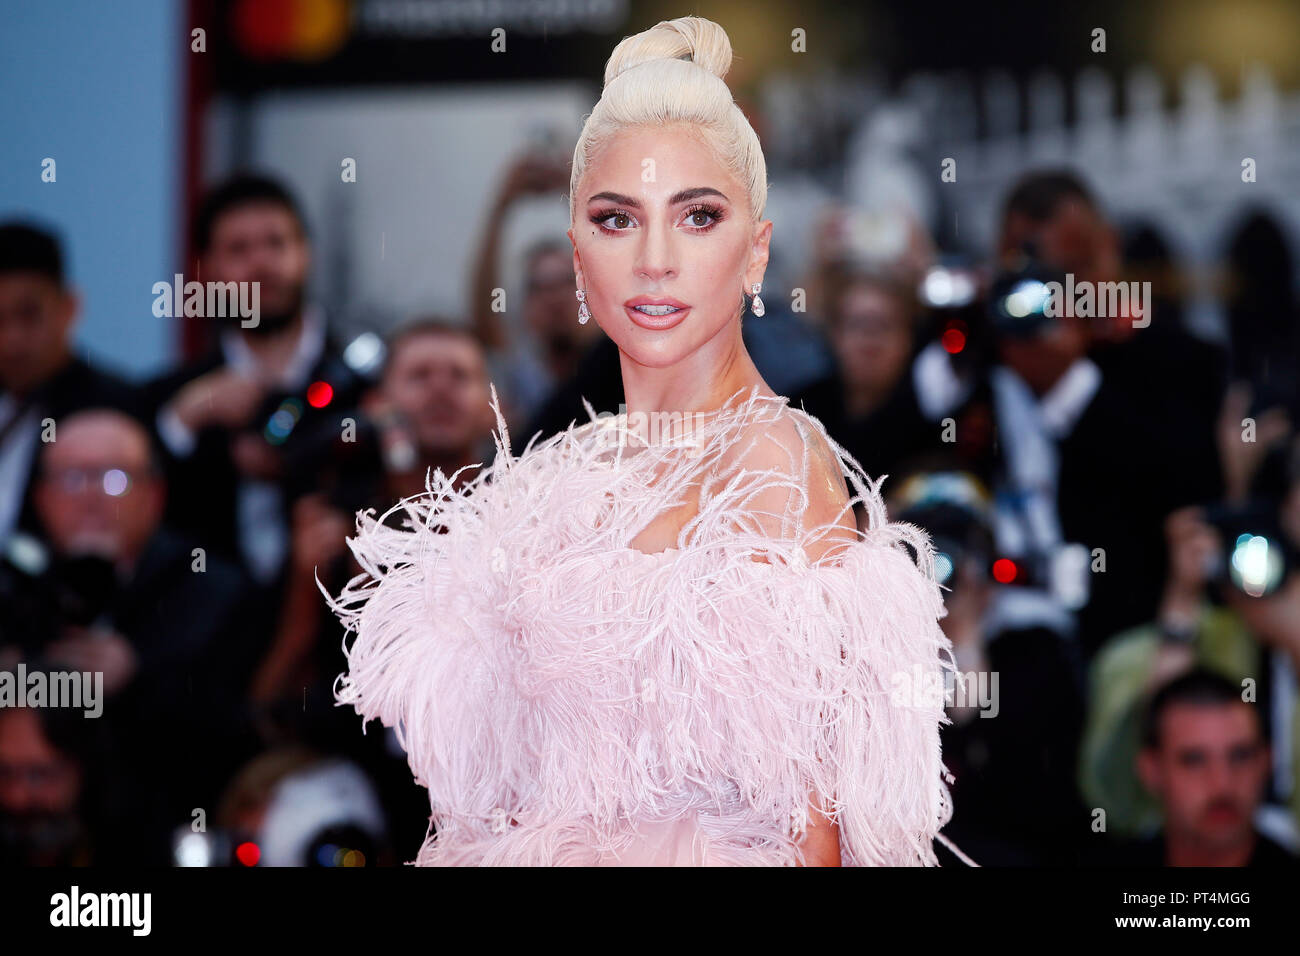 VENICE, ITALY - AUGUST 31: Lady Gaga attends the premiere of the movie 'A Star Is Born' during the 75th Venice Film Festival on August 31, 2018 in Ven Stock Photo